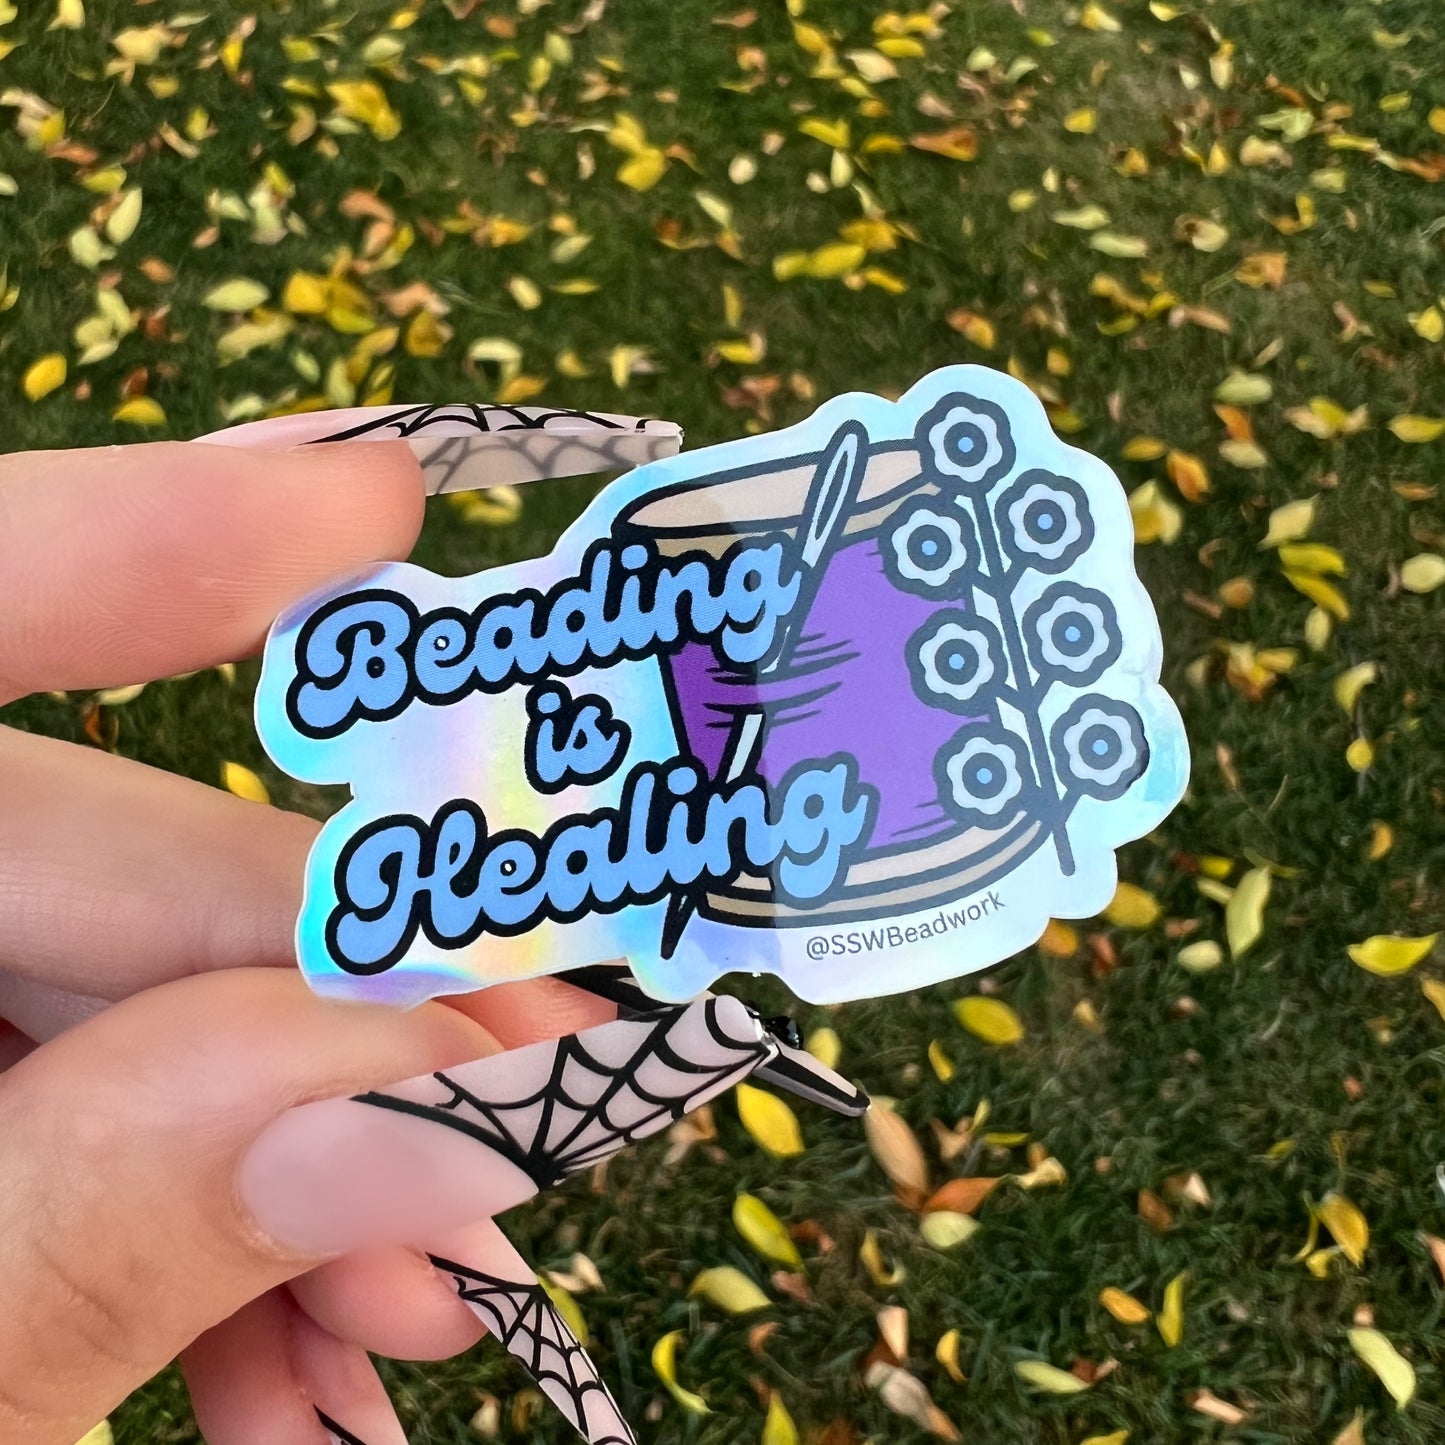 Holographic Beading is Healing Sticker